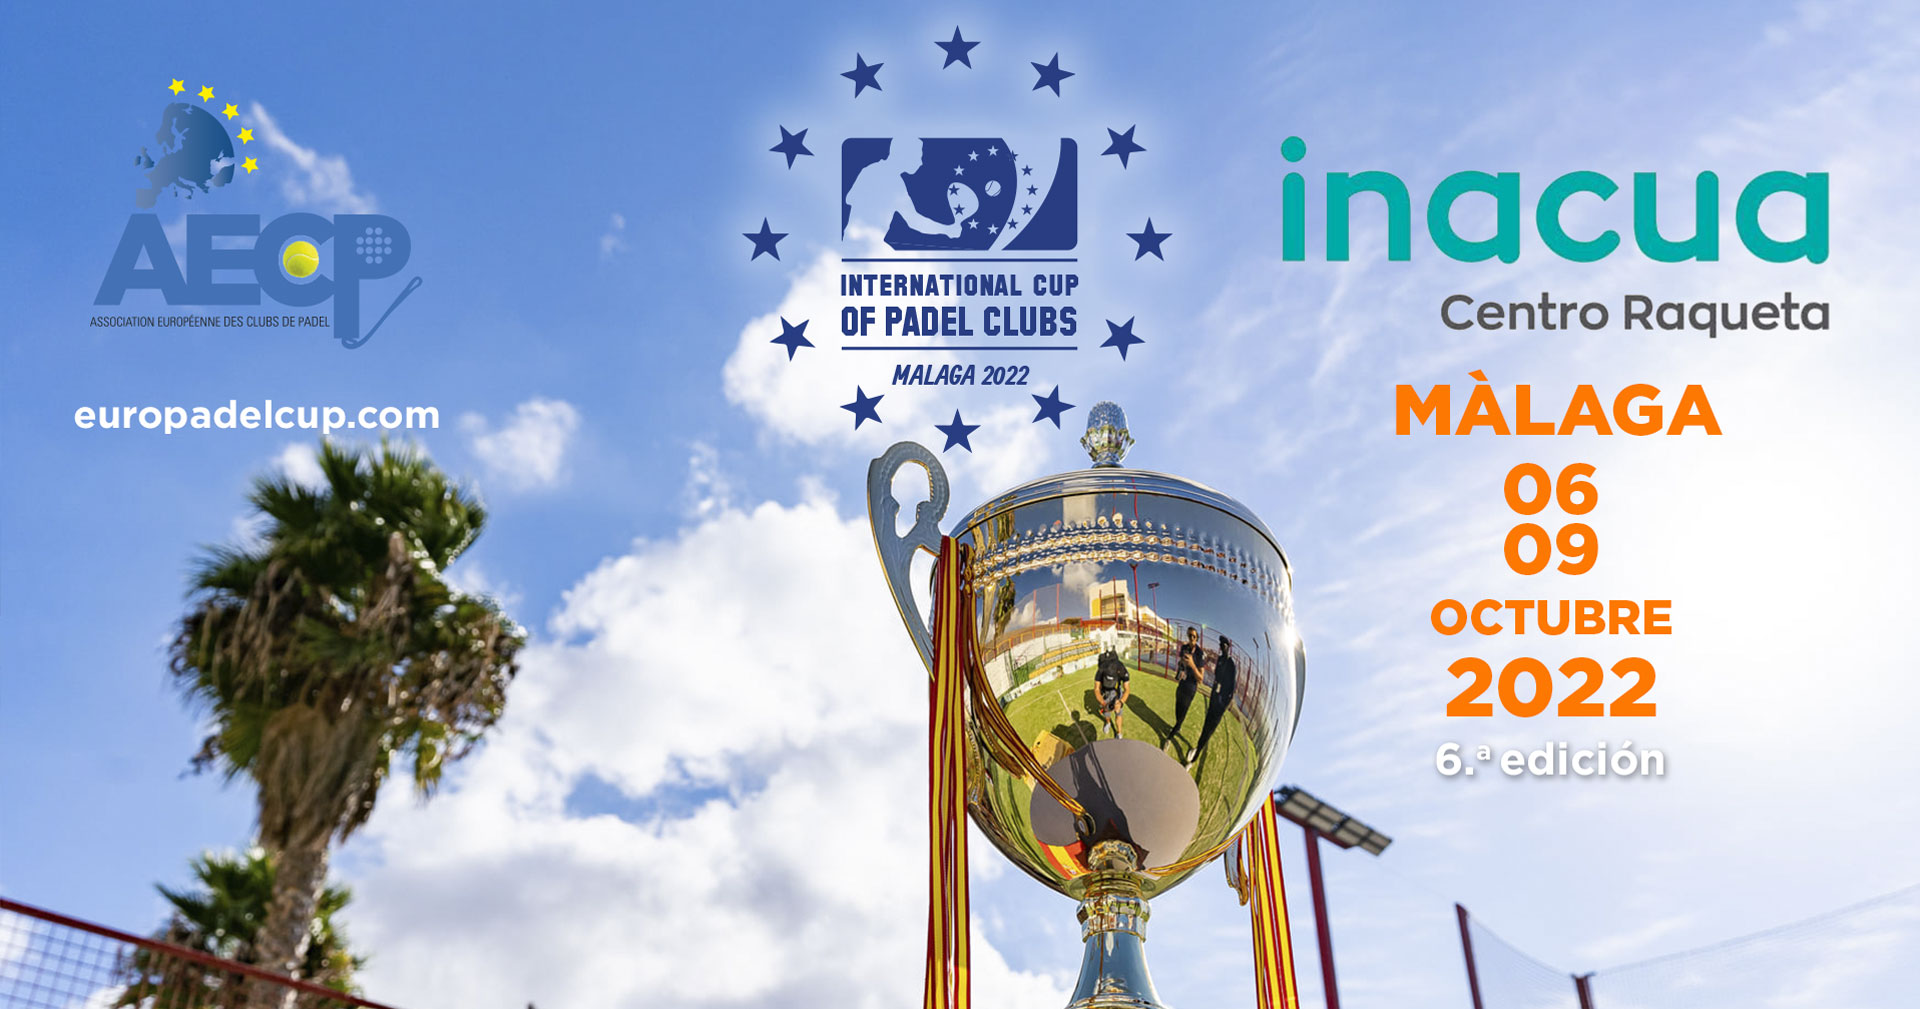 The EFCA launches the International Cup of Clubs of Padel